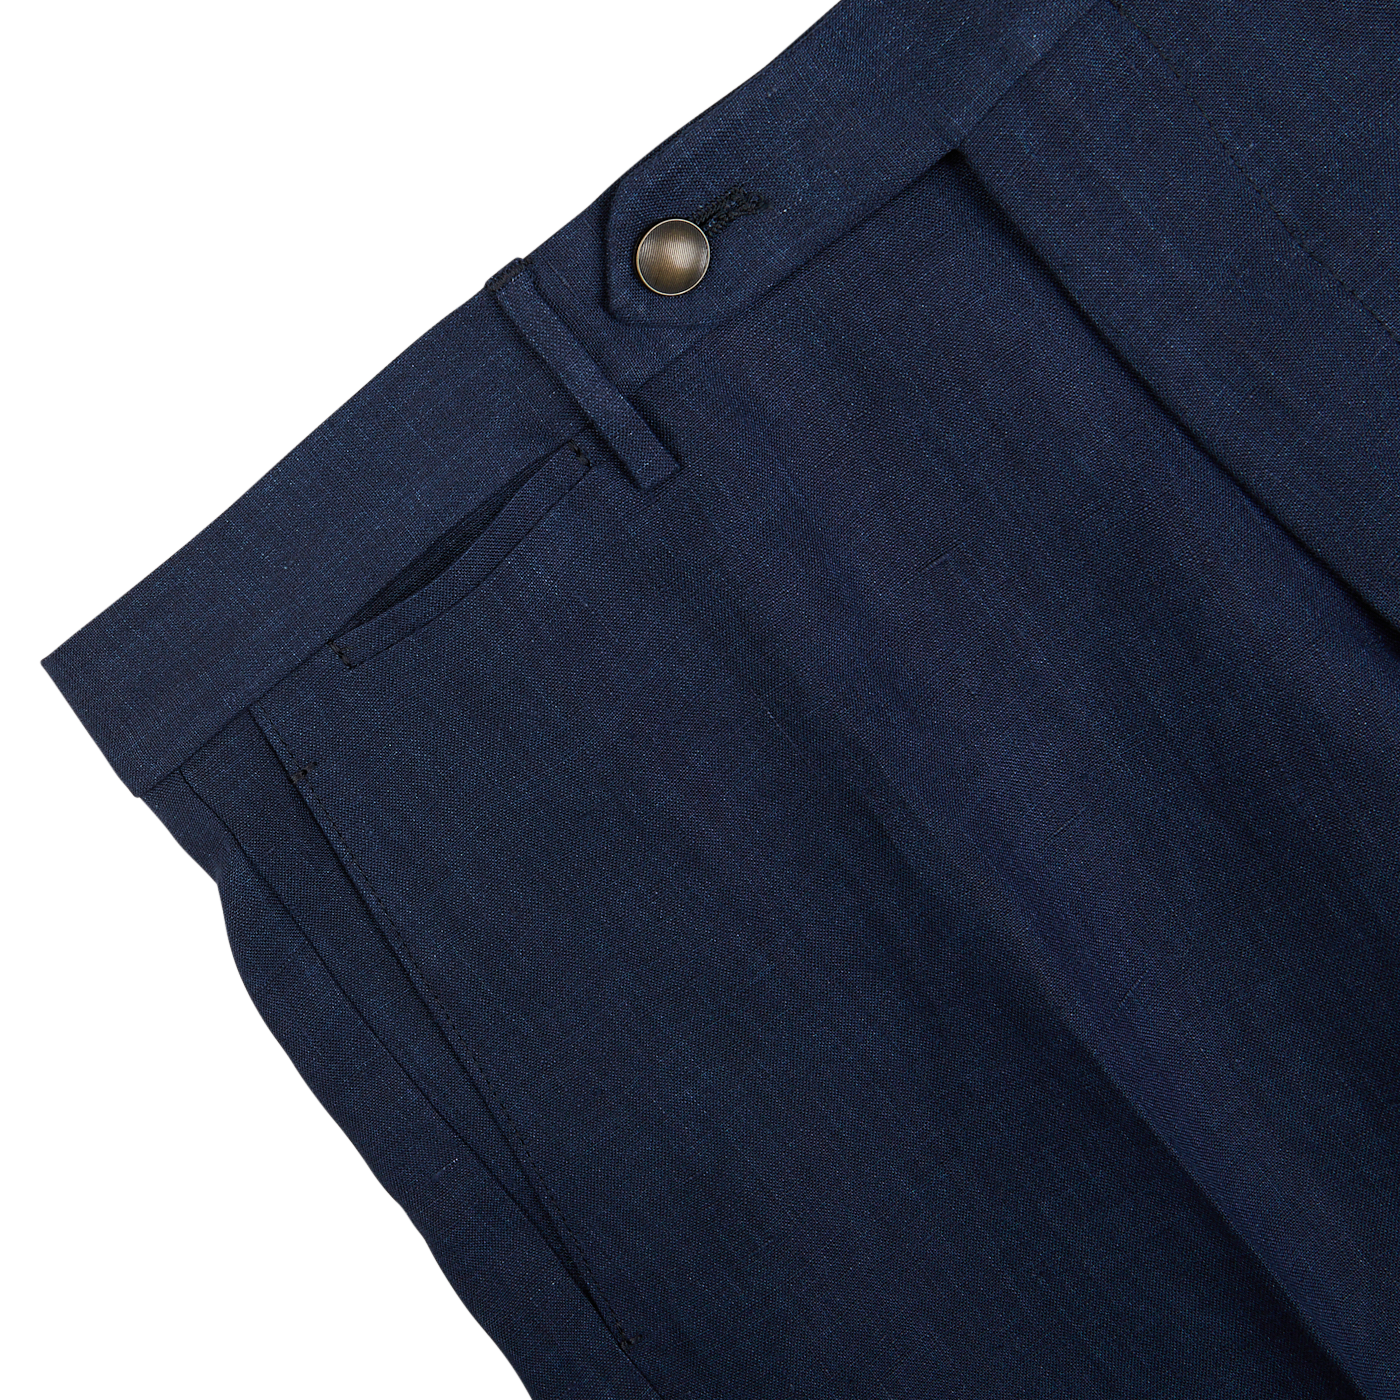 Close-up of Berwich navy blue melange linen flat front trousers with a buttoned waistband and a front pocket detail.